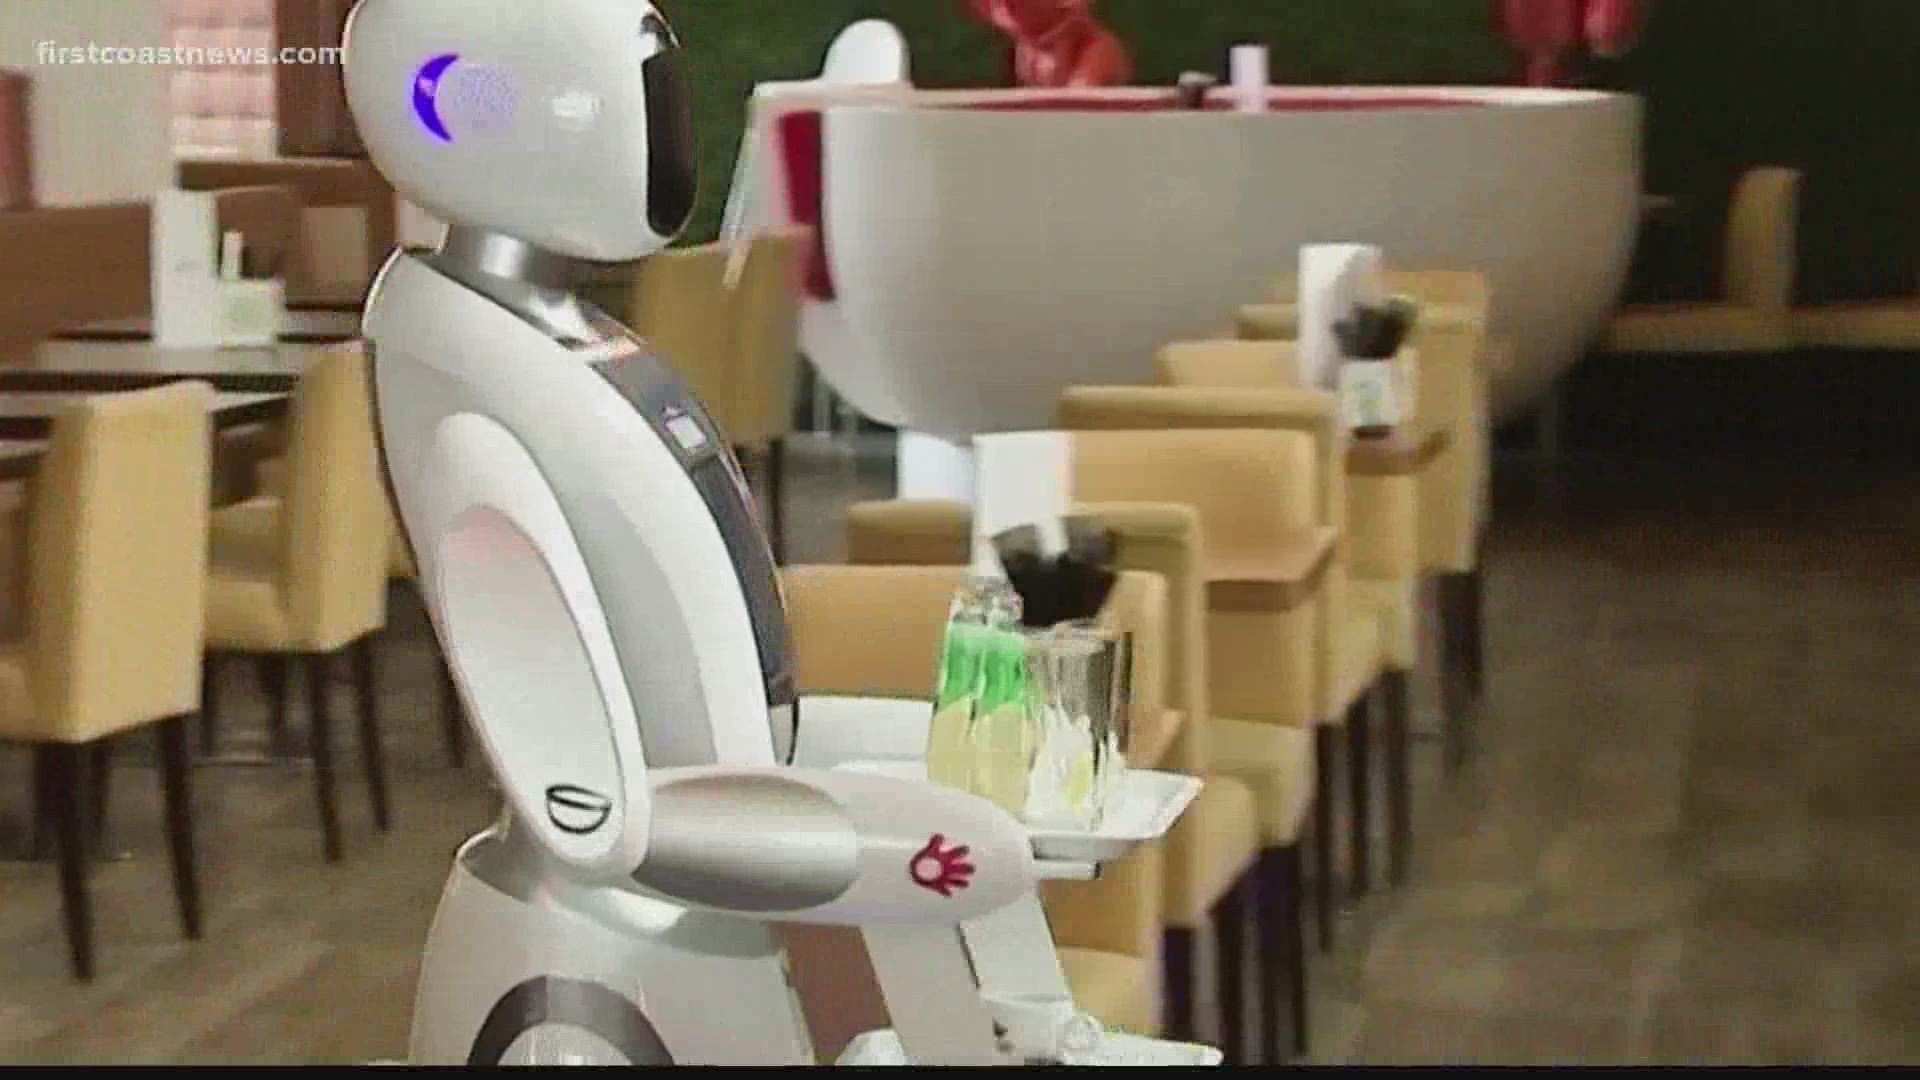 Would you visit a restaurant with robotic servers?